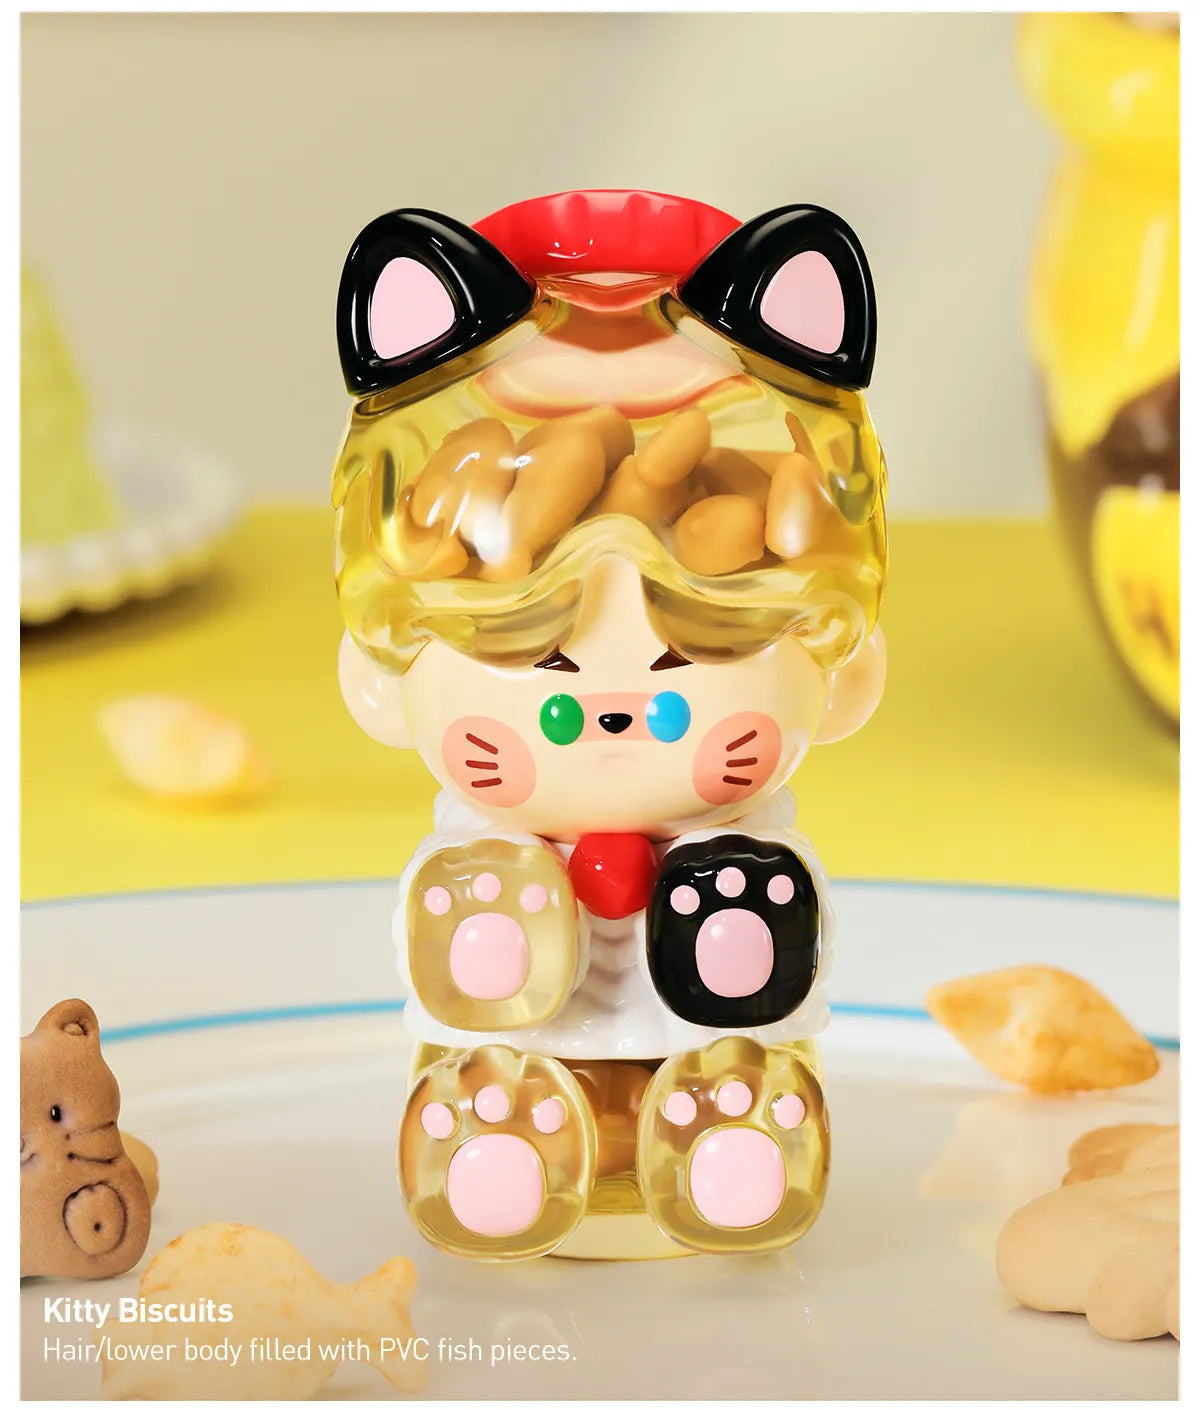 Alt text: Toy cat figurine from PINO JELLY In Your Life Blind Box Series, featuring a hidden snack element.